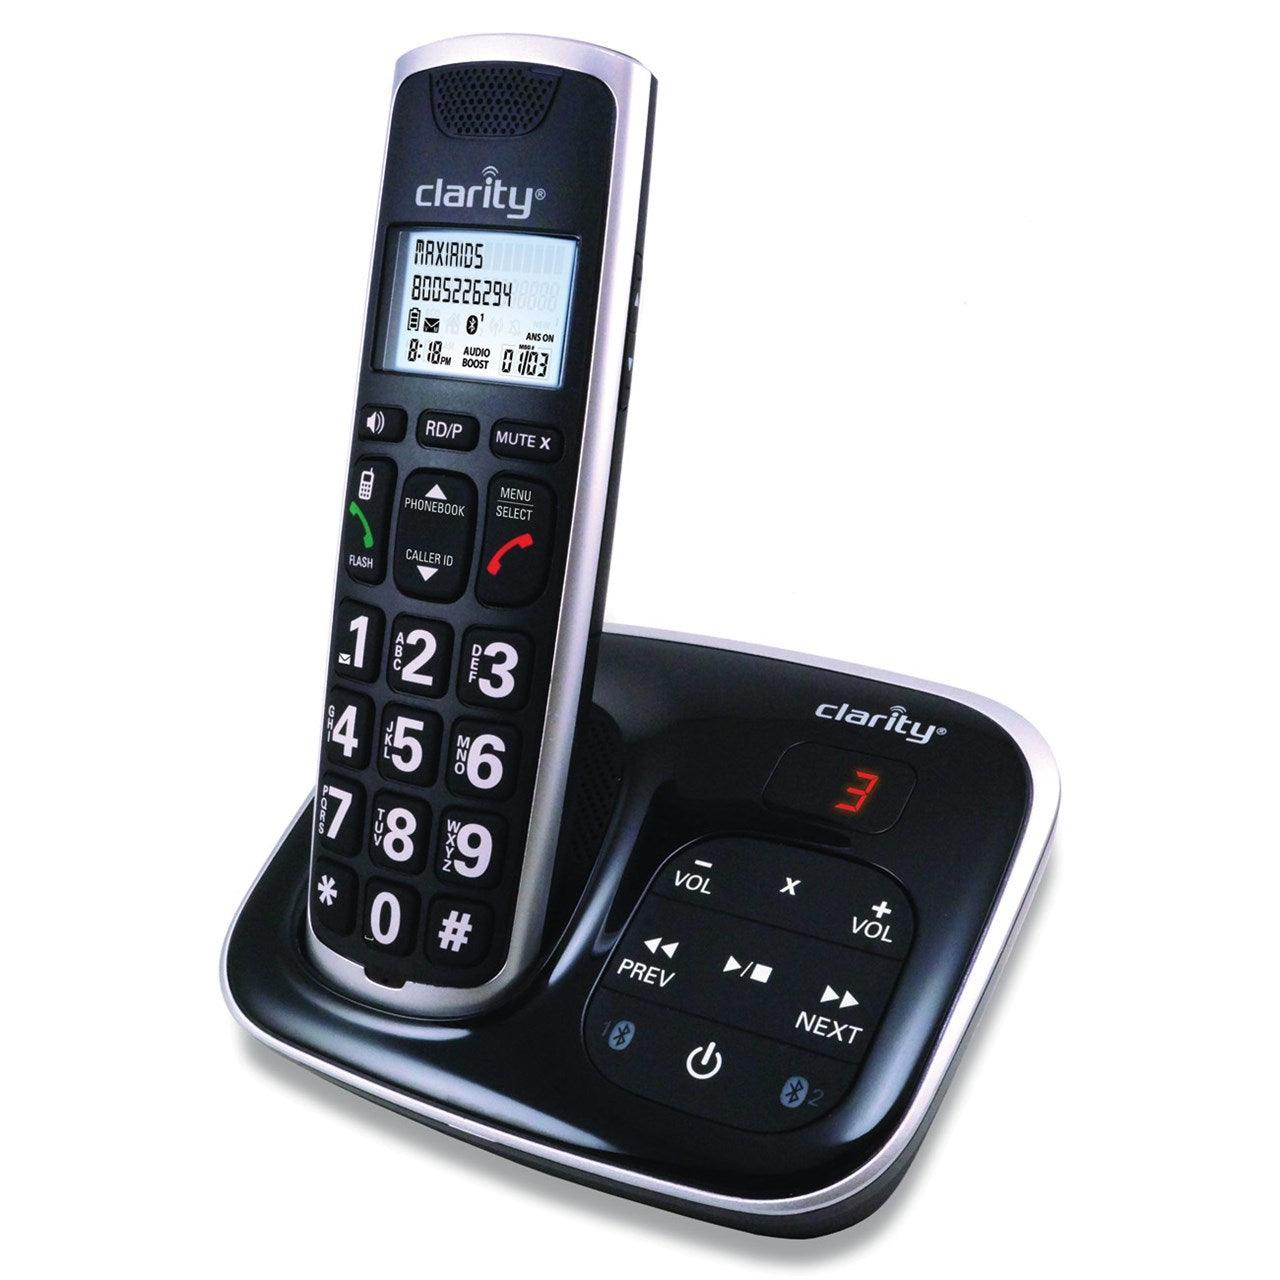 Clarity Amplified Bluetooth Cordless Phone with Answering Machine - The Low Vision Store